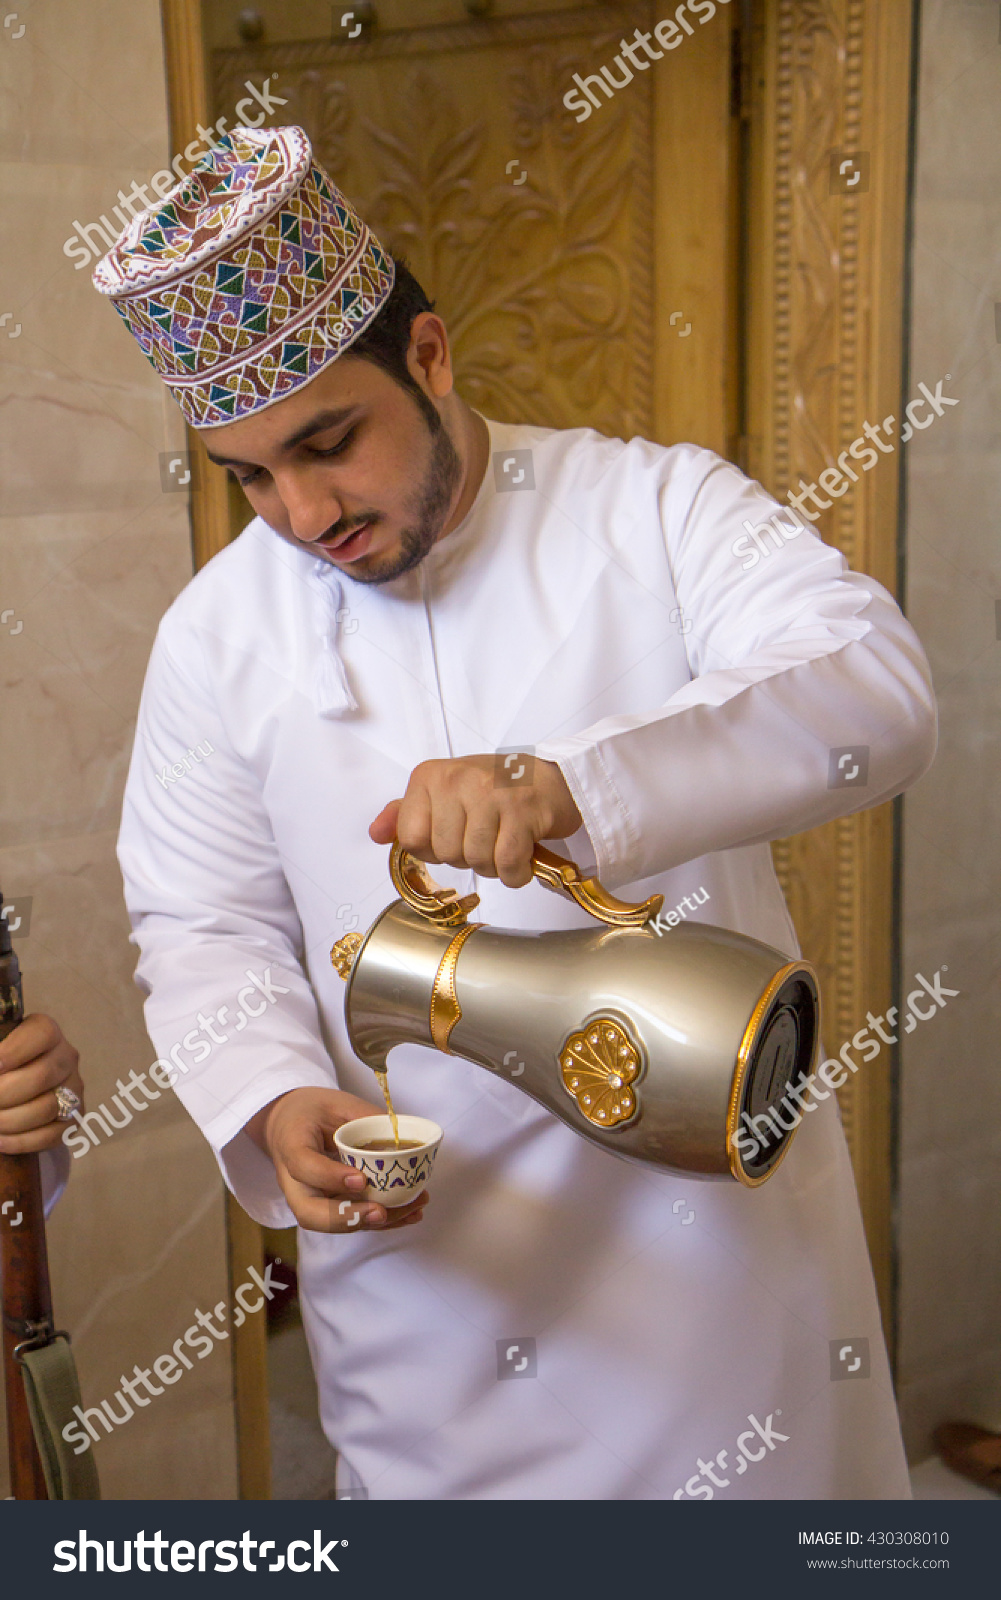 stock-photo-omani-man-in-traditional-clothing-serving-arabic-coffee-may-430308010.jpg